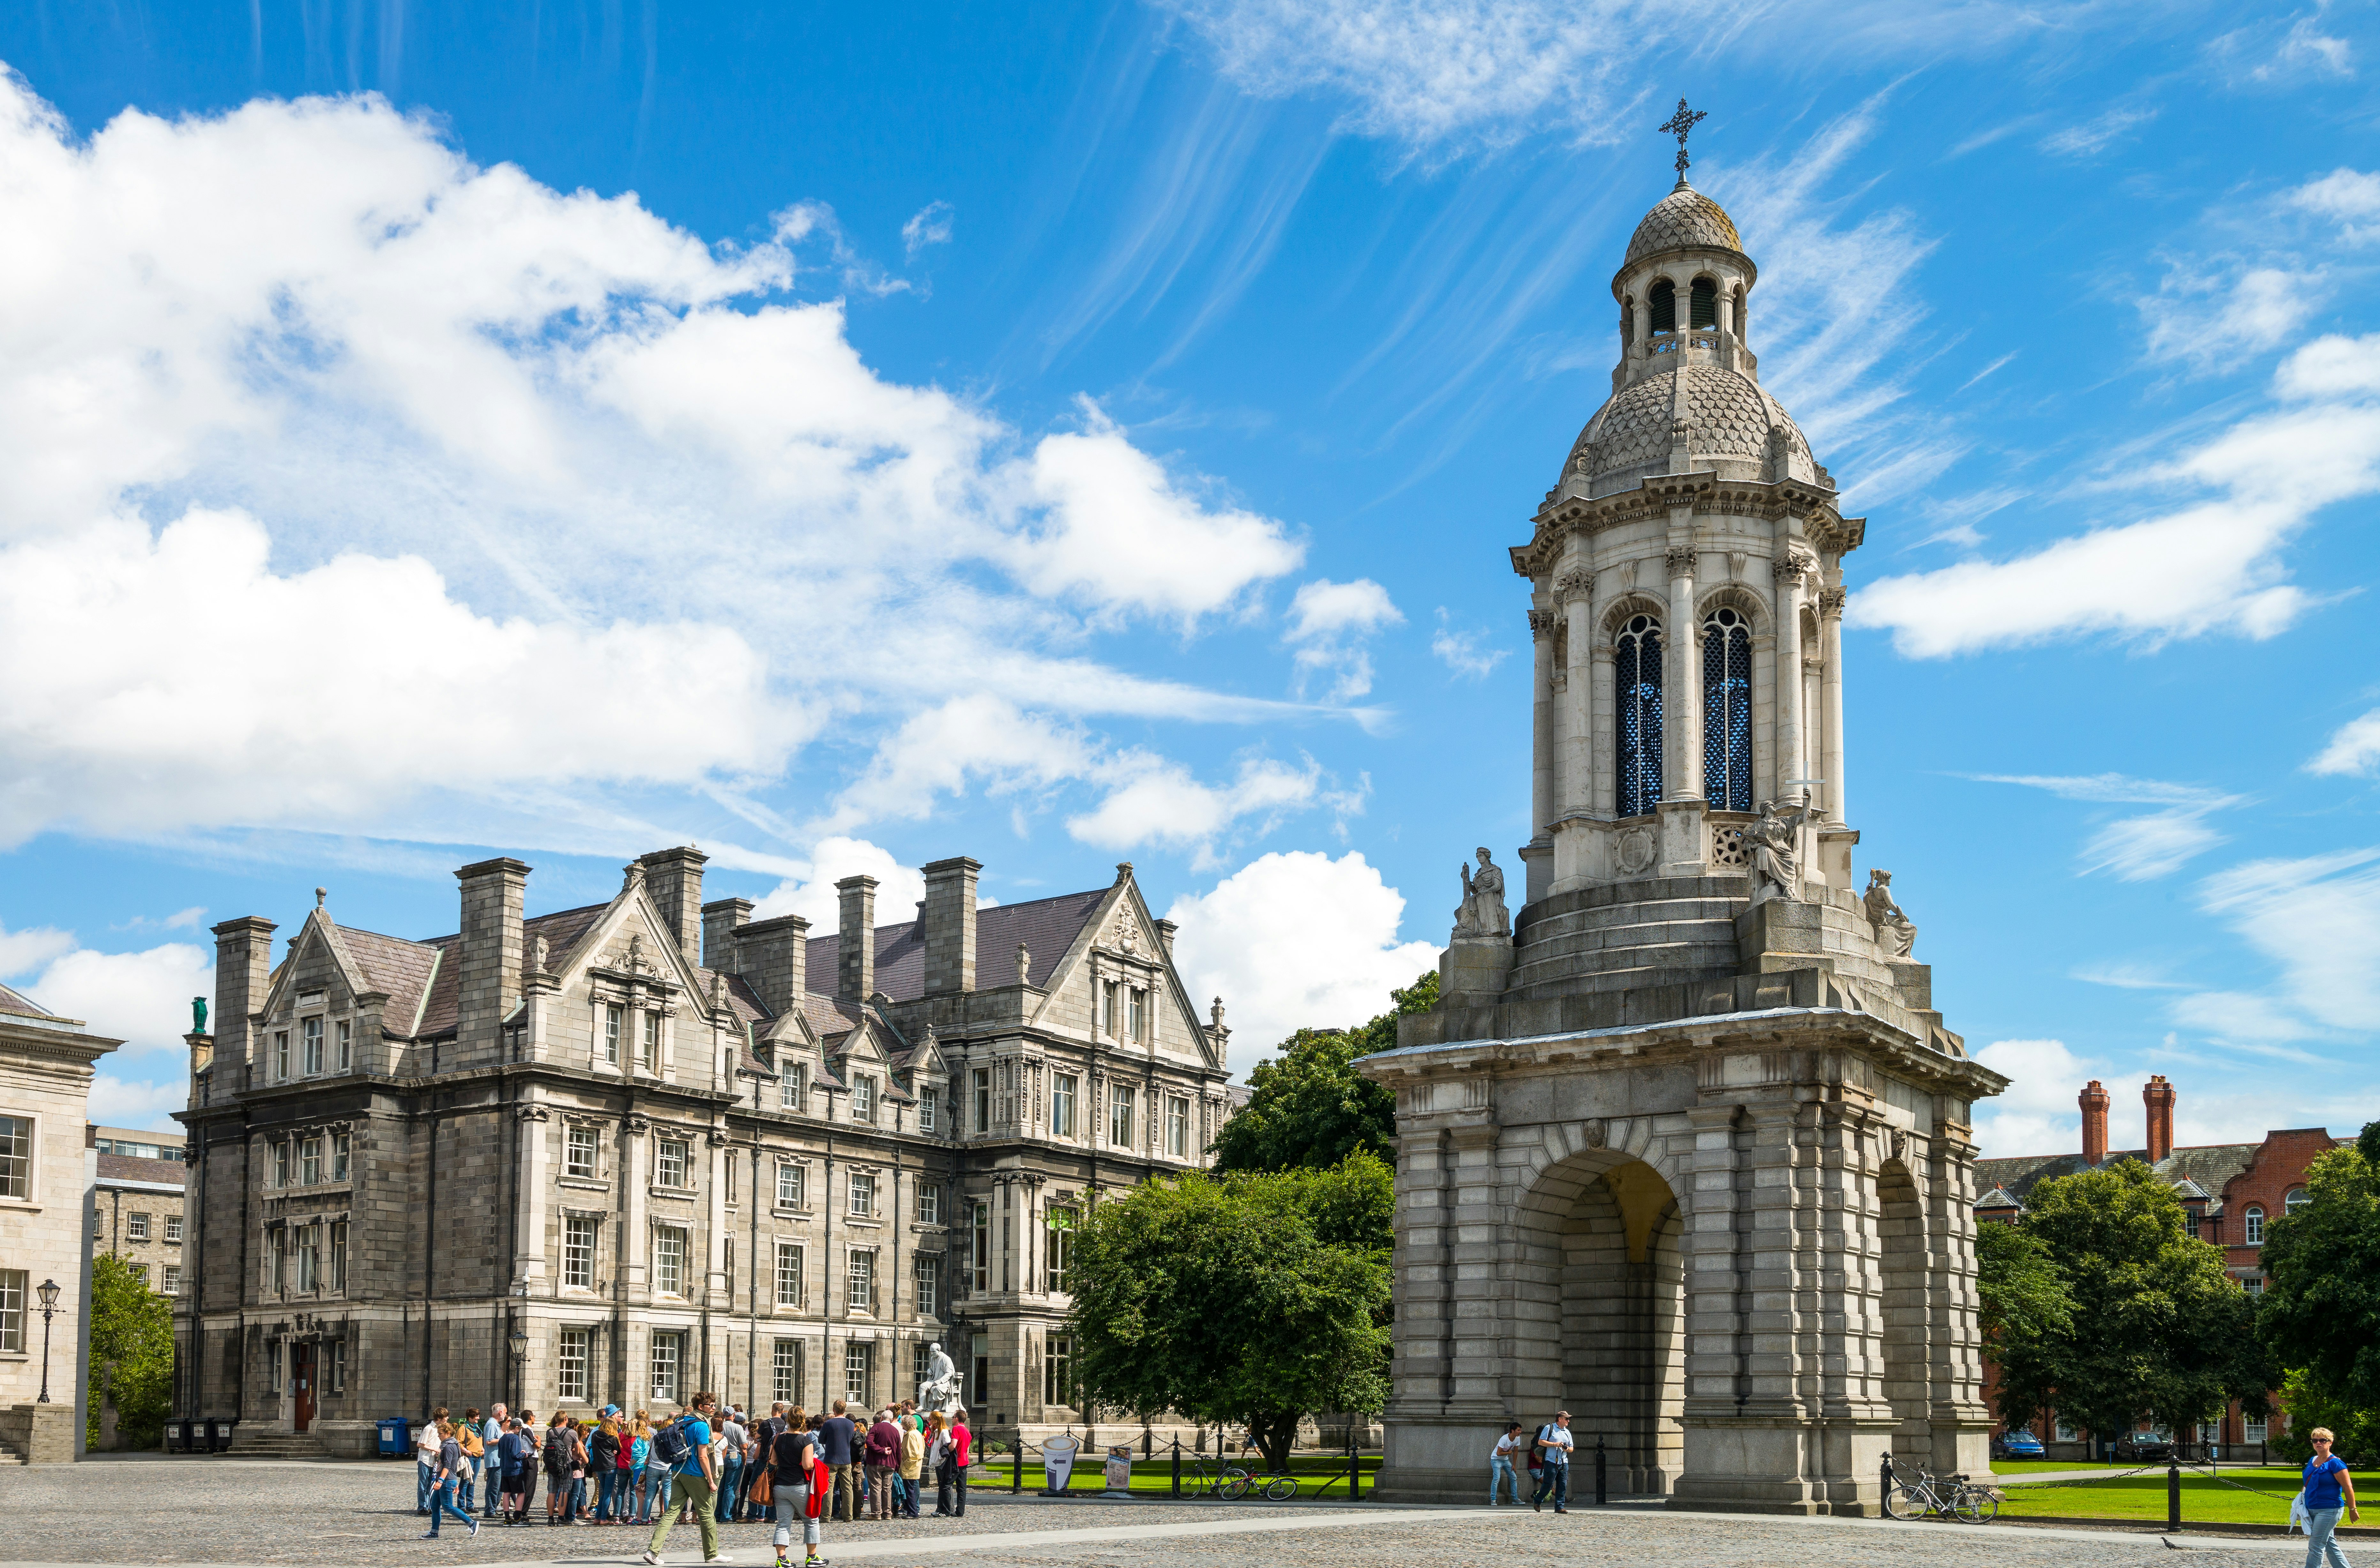 Visitors under the Campanile of the Trinity College